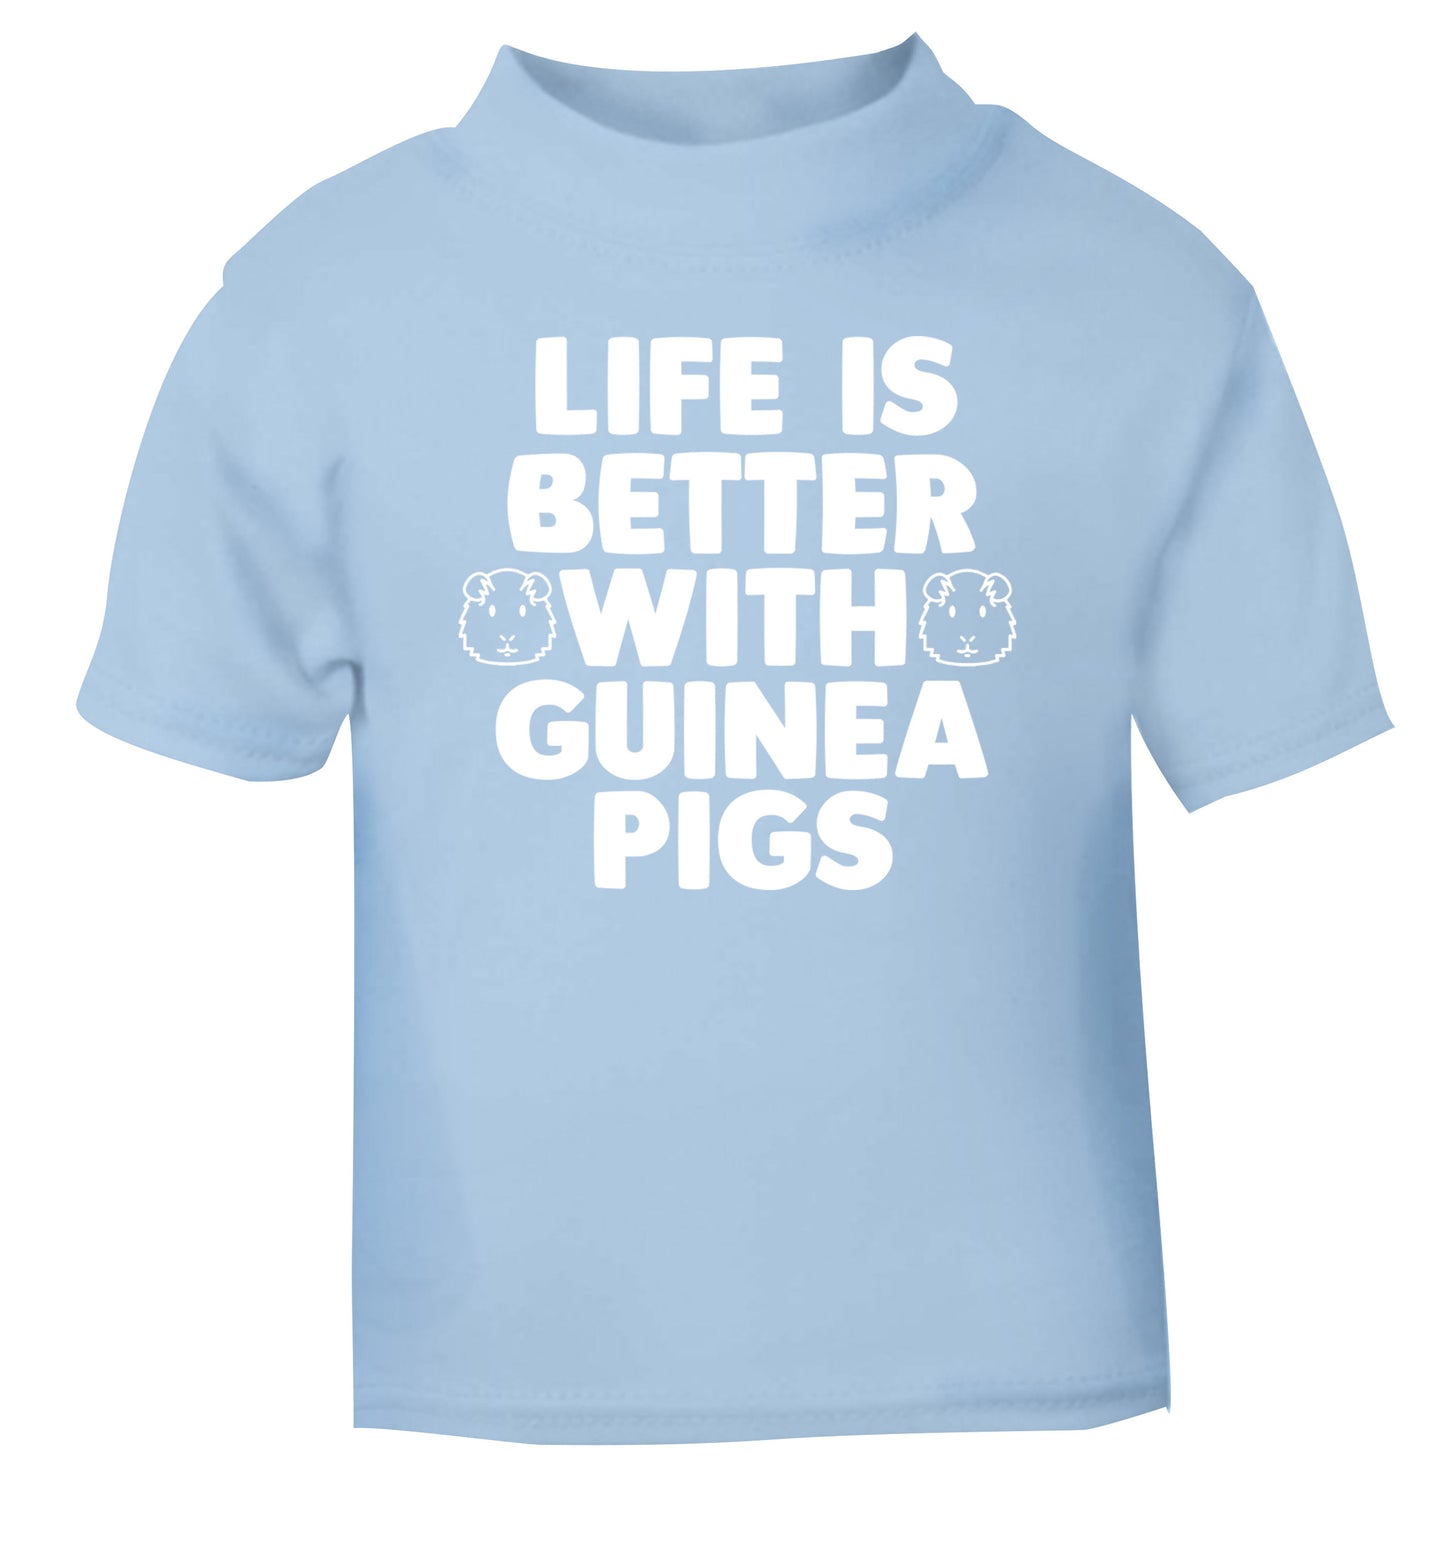 Life is better with guinea pigs light blue Baby Toddler Tshirt 2 Years